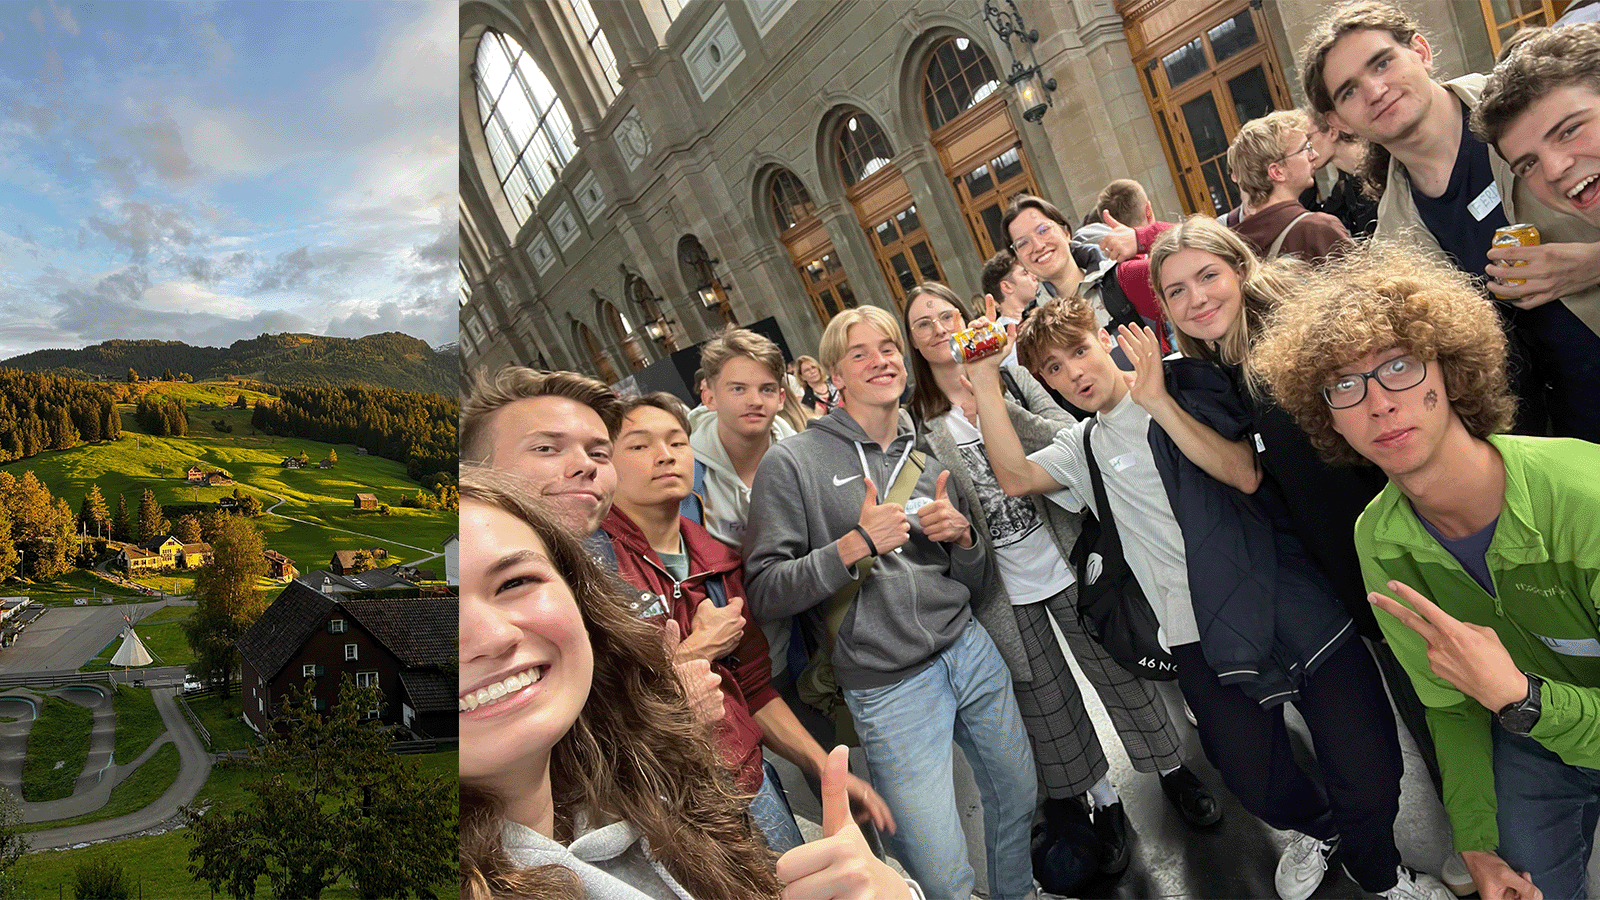 the picture has two elements: Left is a picture of the view where you can see the picturesque landscape of Toggenburg. On the right are 12 female and male students who all smile into the camera for a quick selfie.